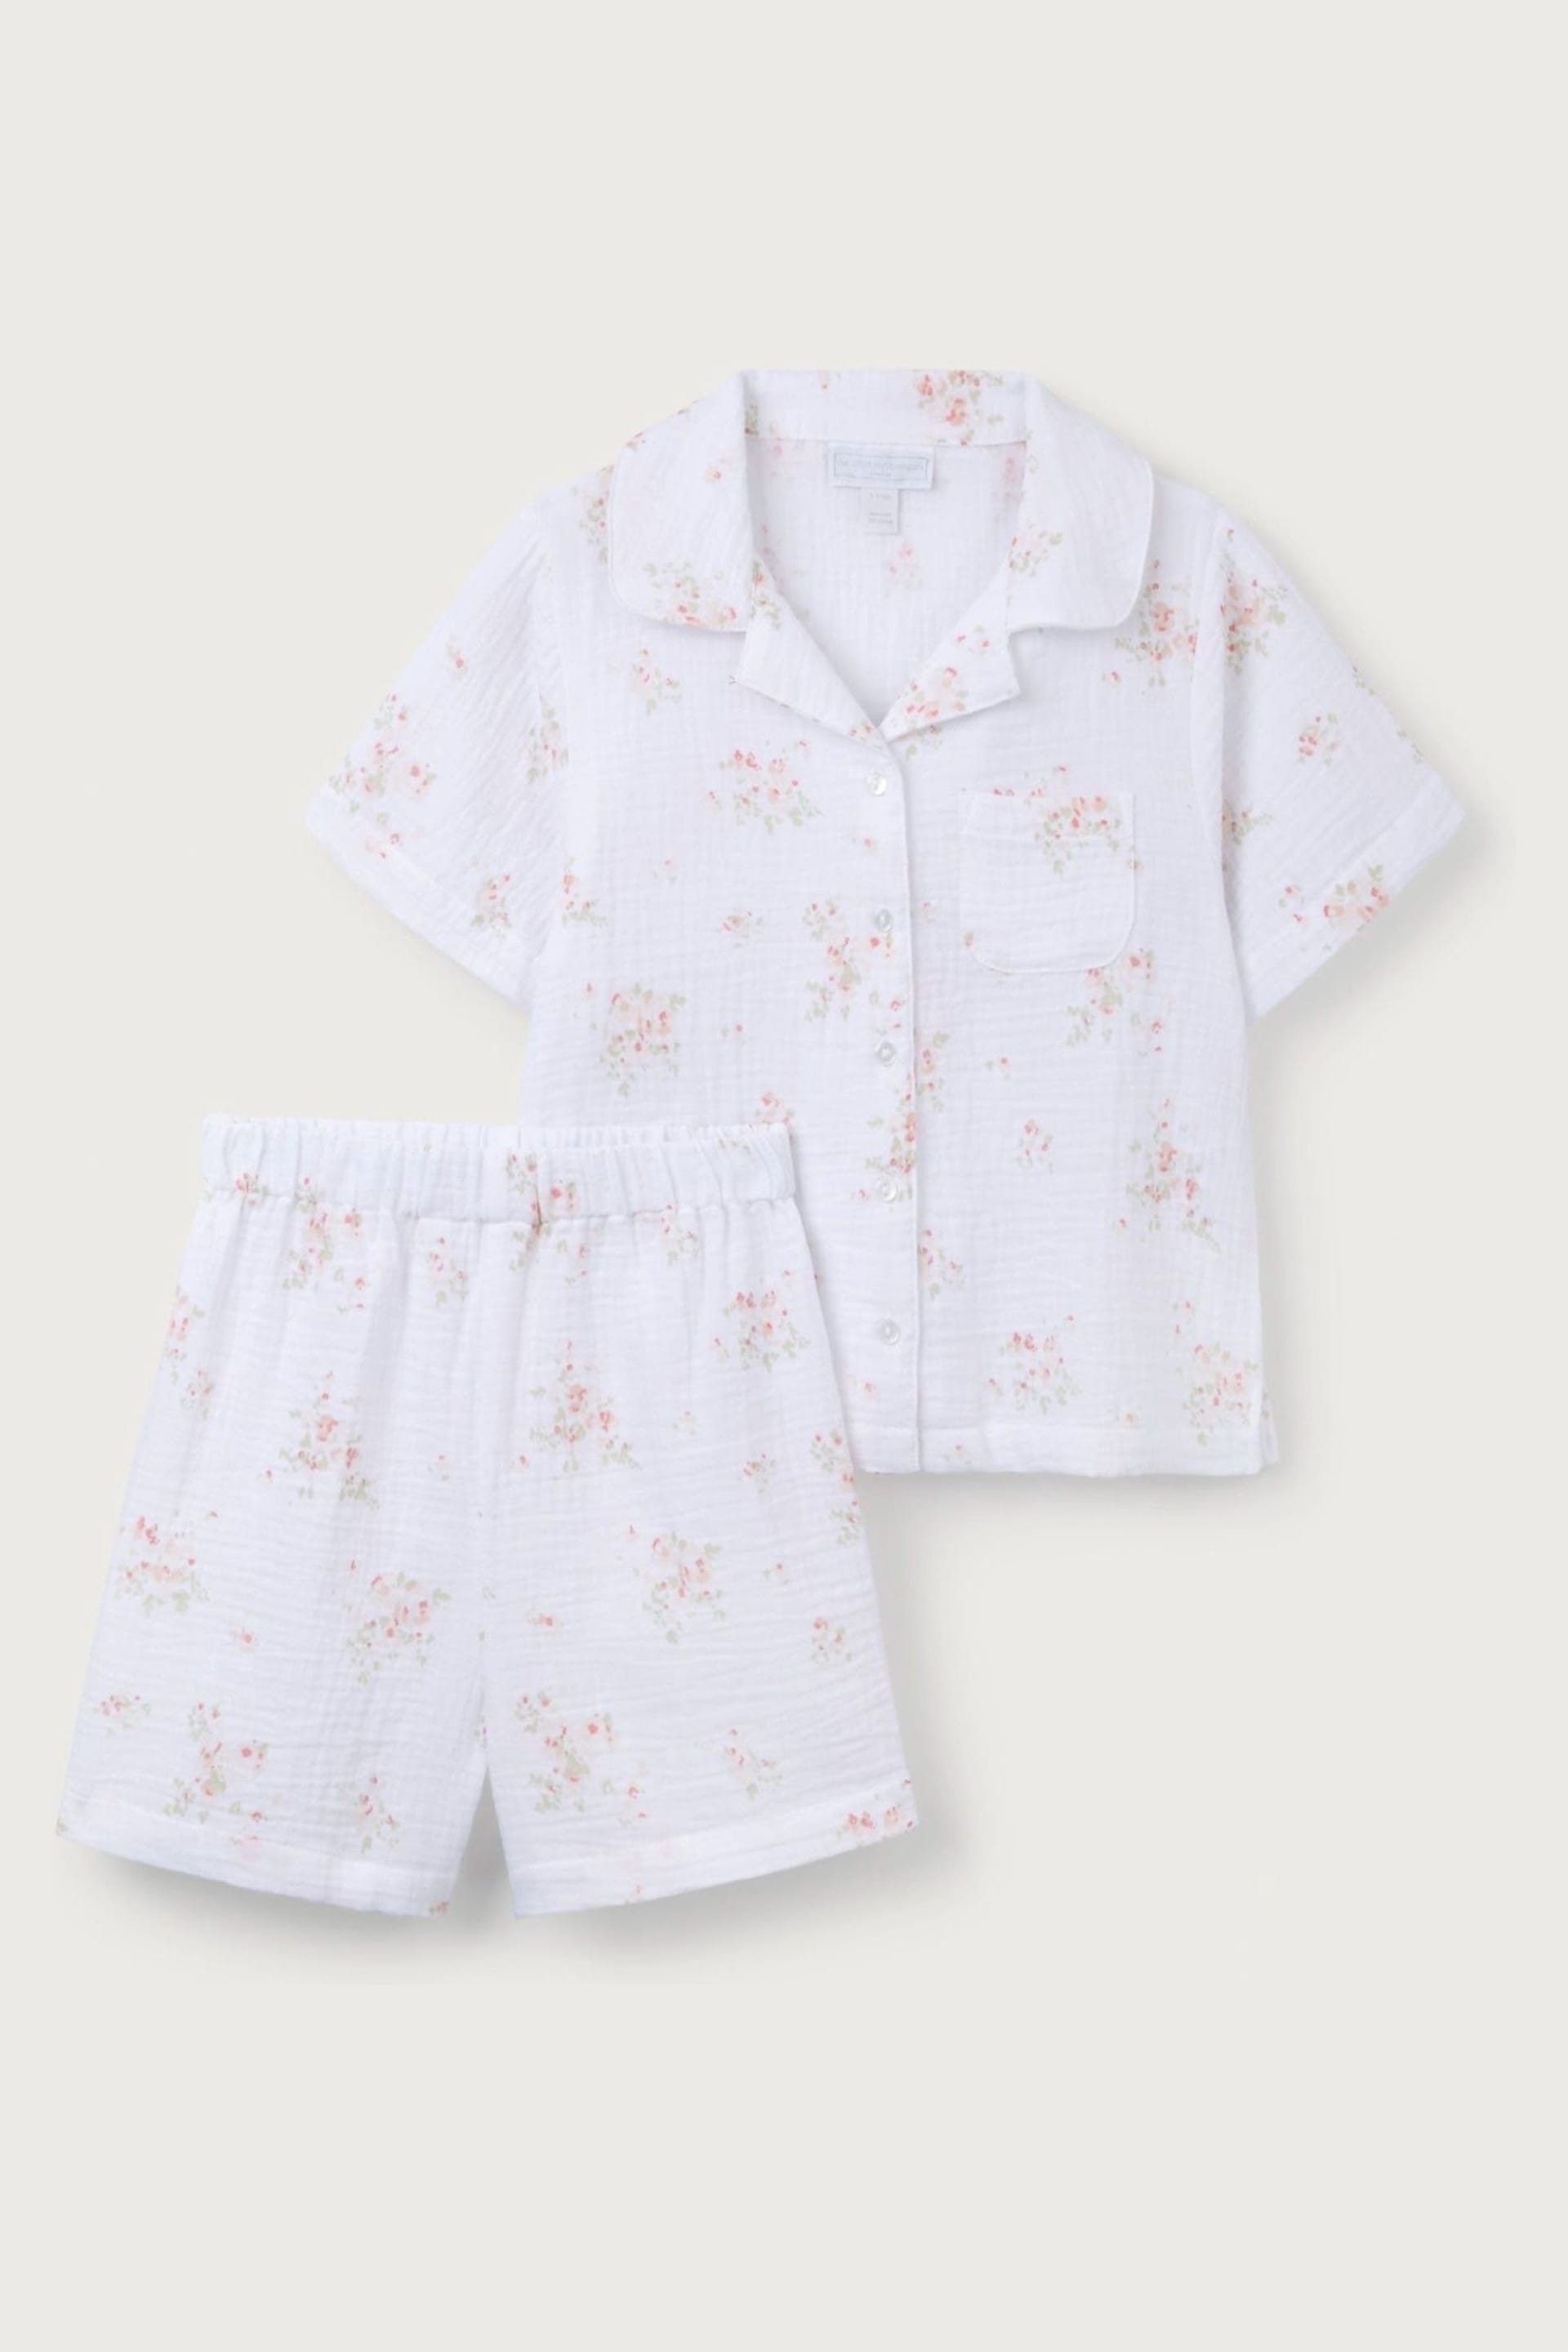 The White Company Organic Cotton Vintage Floral Classic Shortie White Pyjamas - Image 6 of 6